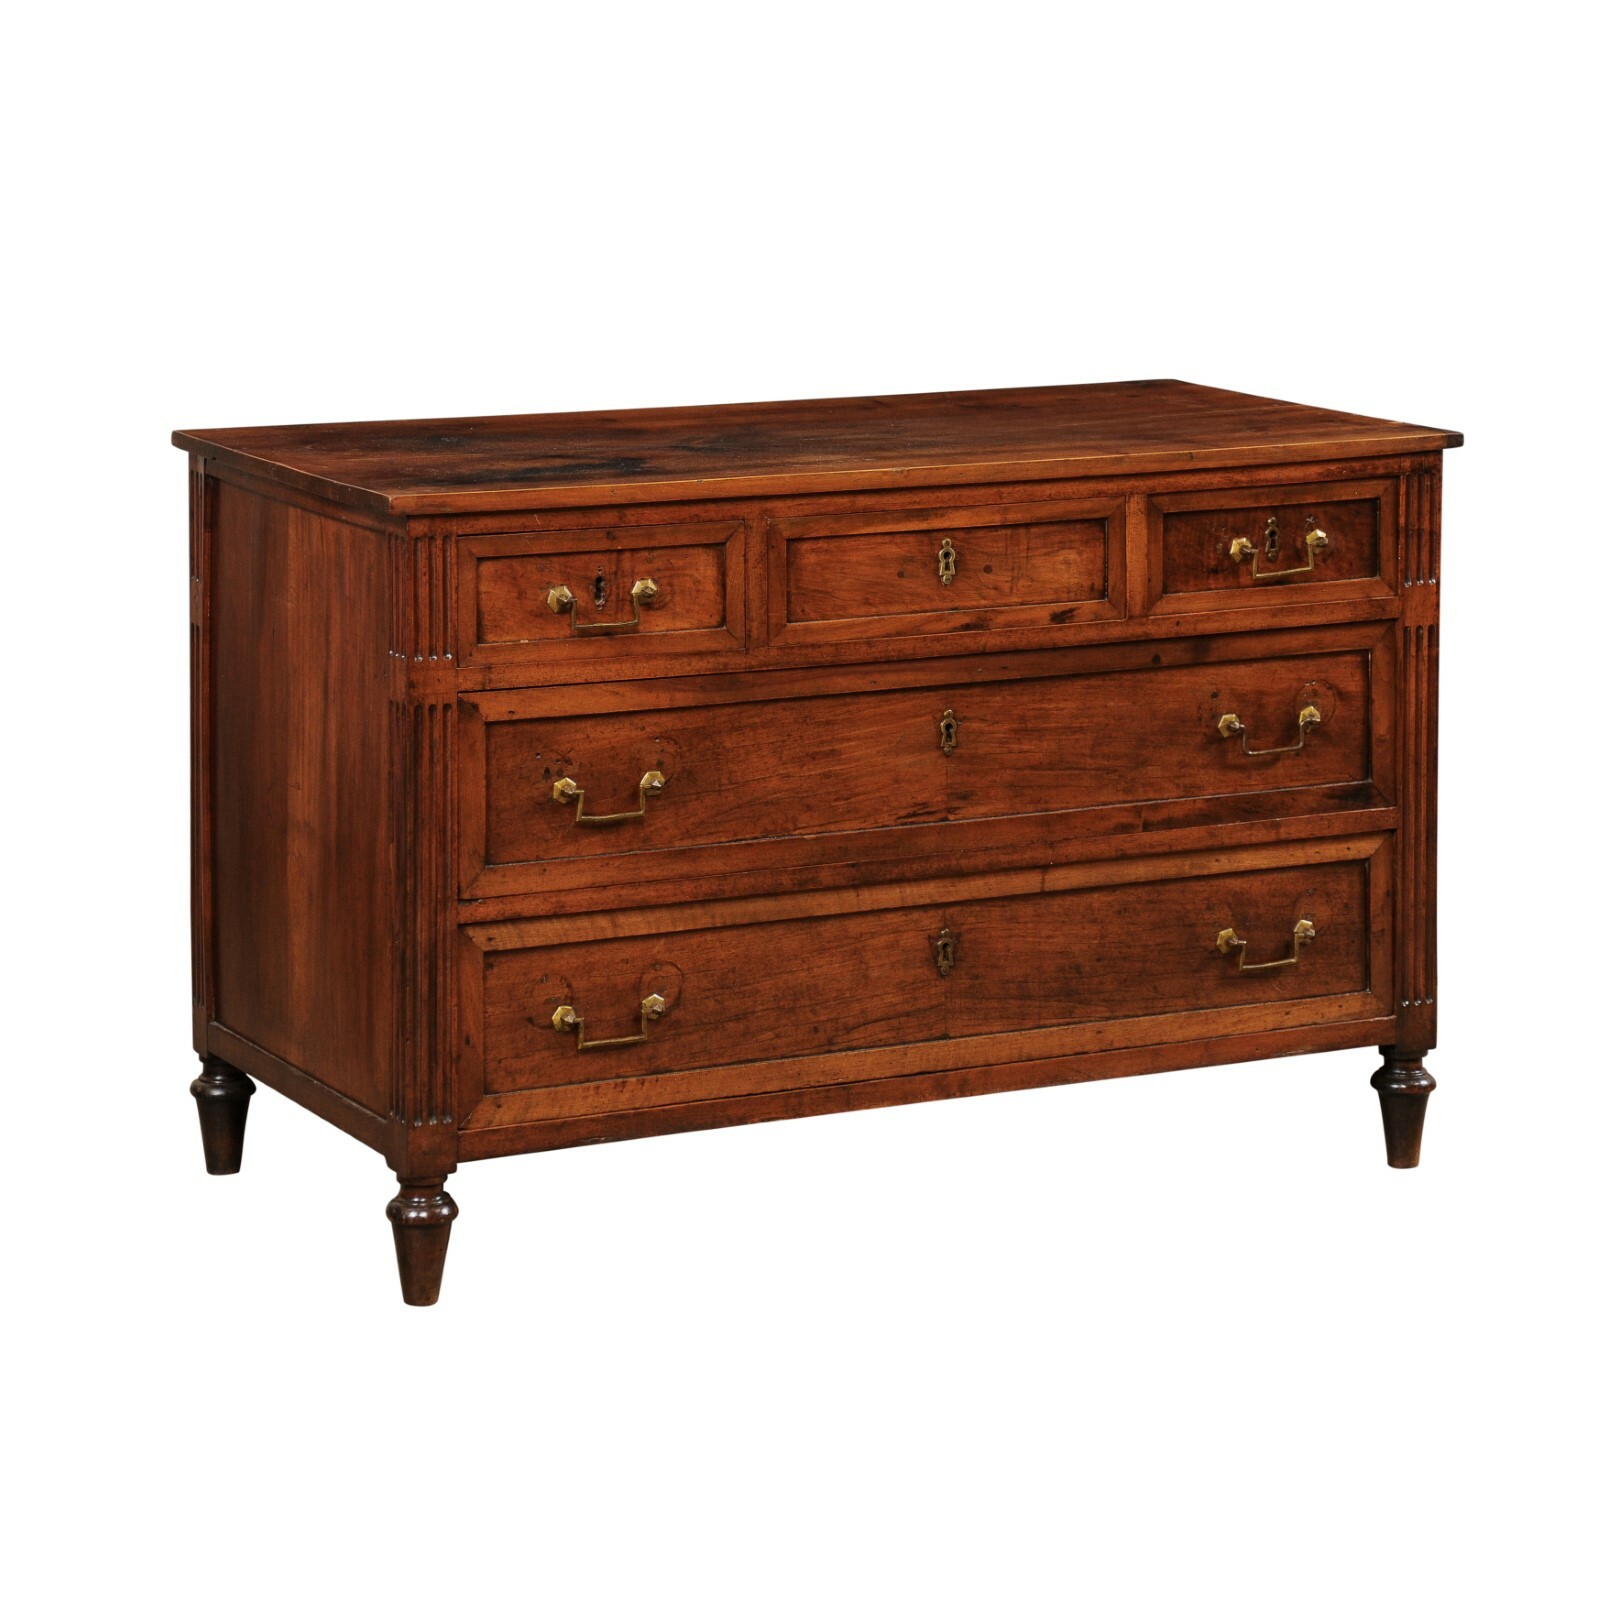 French Neoclassic Walnut Commode, 19th C.